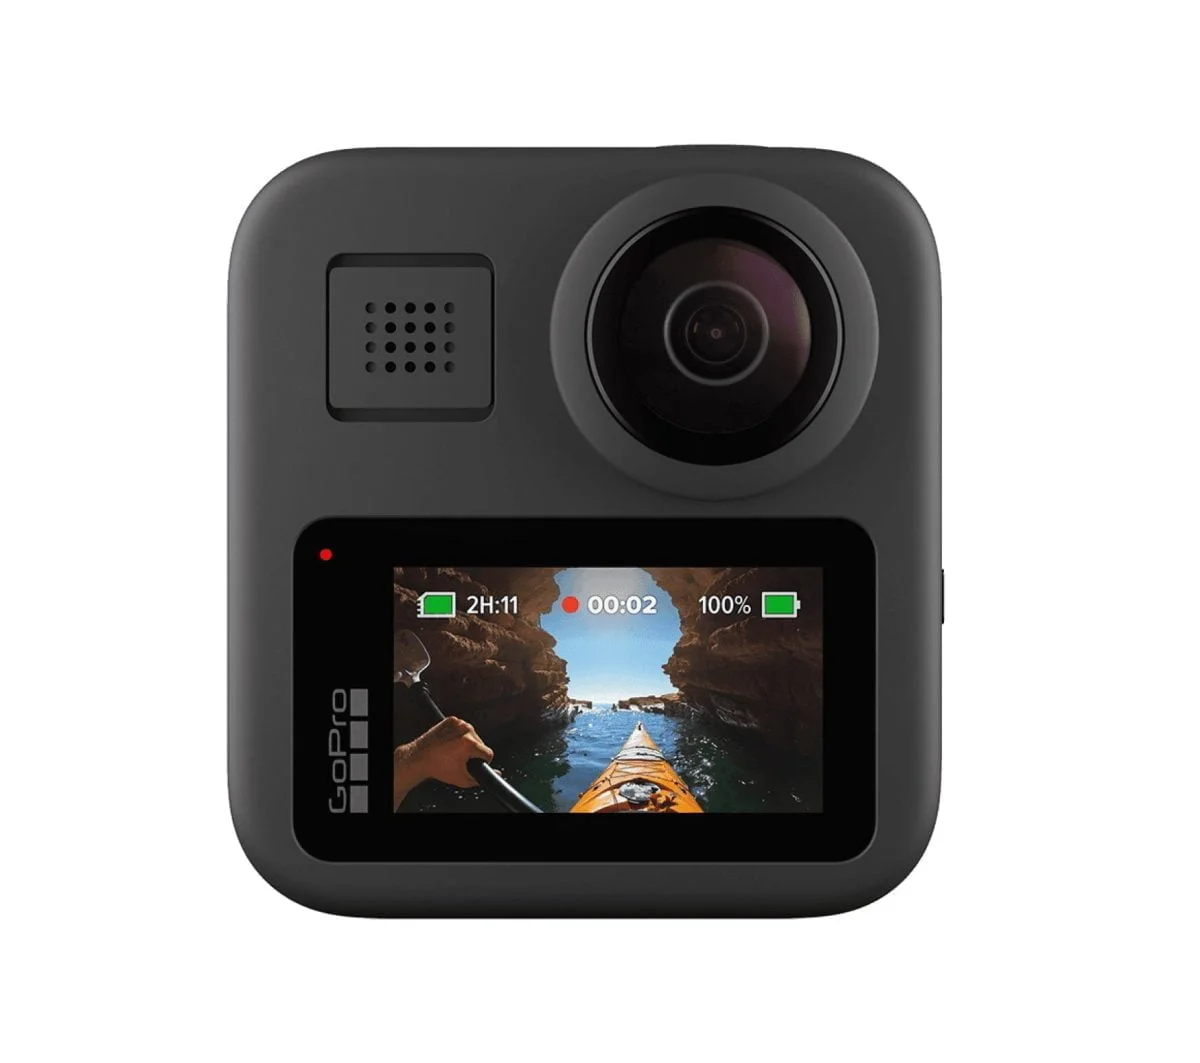 Pdp Max Gallery Back 1920 جوبرو &Lt;H1&Gt;Gopro Max - Waterproof 360 Digital Action Camera With Unbreakable Stabilization, Touch Screen And Voice Control - Live Hd Streaming&Lt;/H1&Gt; &Lt;Div Class=&Quot;Descriptionmodule_Bundles-Container__Skafo Col-Xlarge-6 Col-Large-6 Col-Medium-4 Col-Small-4 Col-Xsmall-8&Quot;&Gt; &Lt;Div Class=&Quot;Descriptionmodule_Detailslist__321Ps&Quot;&Gt; &Lt;P Class=&Quot;Header Header-5&Quot;&Gt;Product Details&Lt;/P&Gt; &Lt;Div Class=&Quot;Row Descriptionmodule_Bundles__3Ah0V Descriptionmodule_Detailitem__1Q3Hp&Quot;&Gt; &Lt;Ul&Gt; &Lt;Li Class=&Quot;Paragraph Paragraph-Small&Quot;&Gt;Shoot Hero Mode Or Go With 360 Mode For Stunning 6K.⁵&Lt;/Li&Gt; &Lt;Li Class=&Quot;Paragraph Paragraph-Small&Quot;&Gt;Unbreakable Stabilization From Max Hypersmooth&Lt;/Li&Gt; &Lt;Li Class=&Quot;Paragraph Paragraph-Small&Quot;&Gt;Waterproof To 16Ft + Built Tough&Lt;/Li&Gt; &Lt;Li Class=&Quot;Paragraph Paragraph-Small&Quot;&Gt;Premium 360 + Stereo Audio From 6 Mics&Lt;/Li&Gt; &Lt;Li Class=&Quot;Paragraph Paragraph-Small&Quot;&Gt;Vlog To The Max With 1080P Live Streaming&Lt;/Li&Gt; &Lt;Li Class=&Quot;Paragraph Paragraph-Small&Quot;&Gt;Max Timewarp, Powerpano, 4 Digital Lenses + So Many Other Features To Nail Any Shot&Lt;/Li&Gt; &Lt;Li Class=&Quot;Paragraph Paragraph-Small&Quot;&Gt;Compatible With Quik App&Lt;/Li&Gt; &Lt;Li Class=&Quot;Paragraph Paragraph-Small&Quot;&Gt;Compatible With Over 30 Mounts + Accessories&Lt;/Li&Gt; &Lt;/Ul&Gt; &Lt;/Div&Gt; &Lt;/Div&Gt; &Lt;/Div&Gt; &Nbsp; Gopro Max Gopro Max - Waterproof 360 Digital Action Camera With Unbreakable Stabilization, Touch Screen And Voice Control - Live Hd Streaming